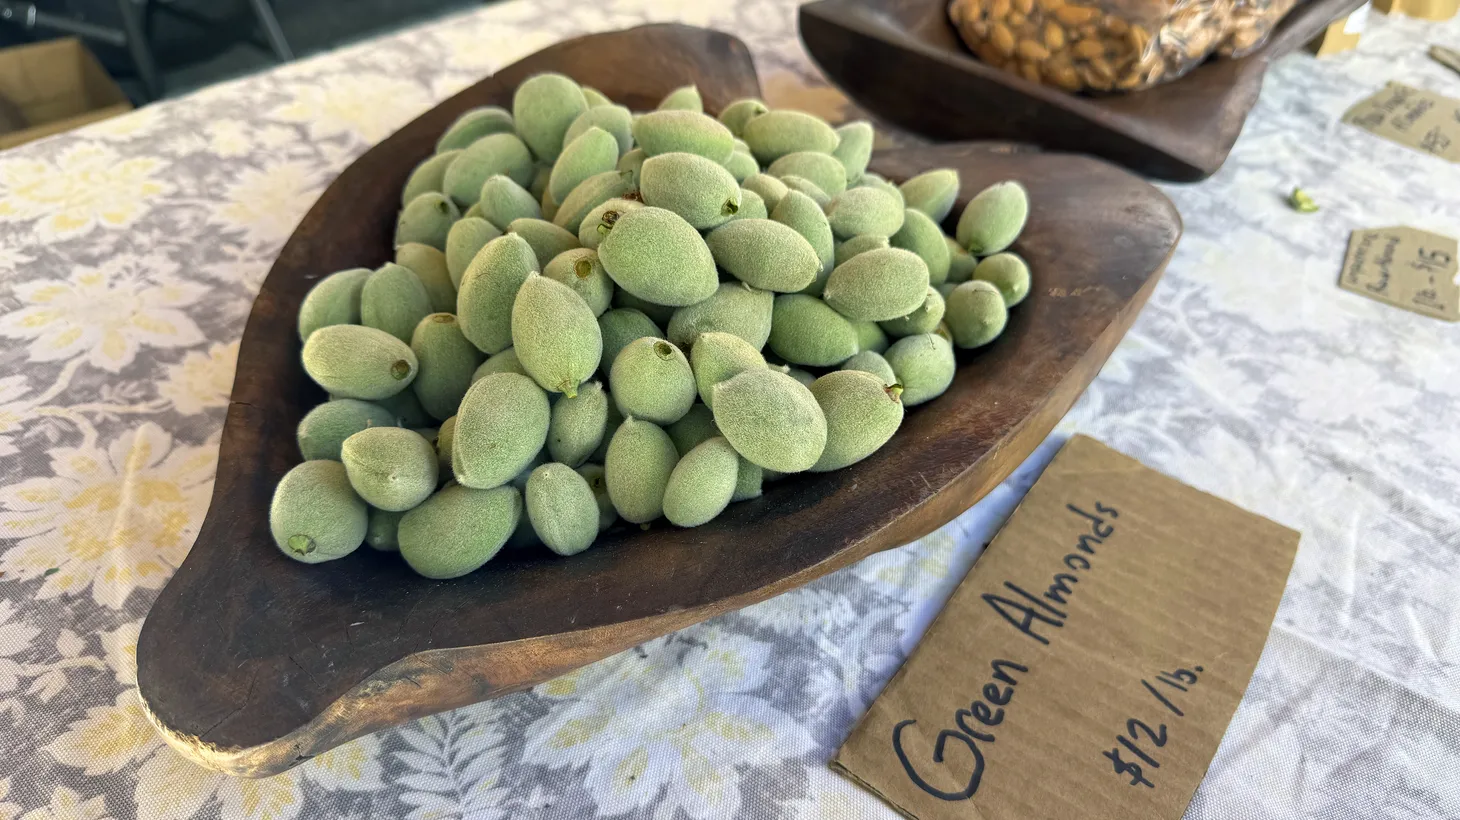 These green almonds with their fuzzy exteriors will only be at farmers markets for the next few weeks. Eventually, they'll grow into mature almonds.